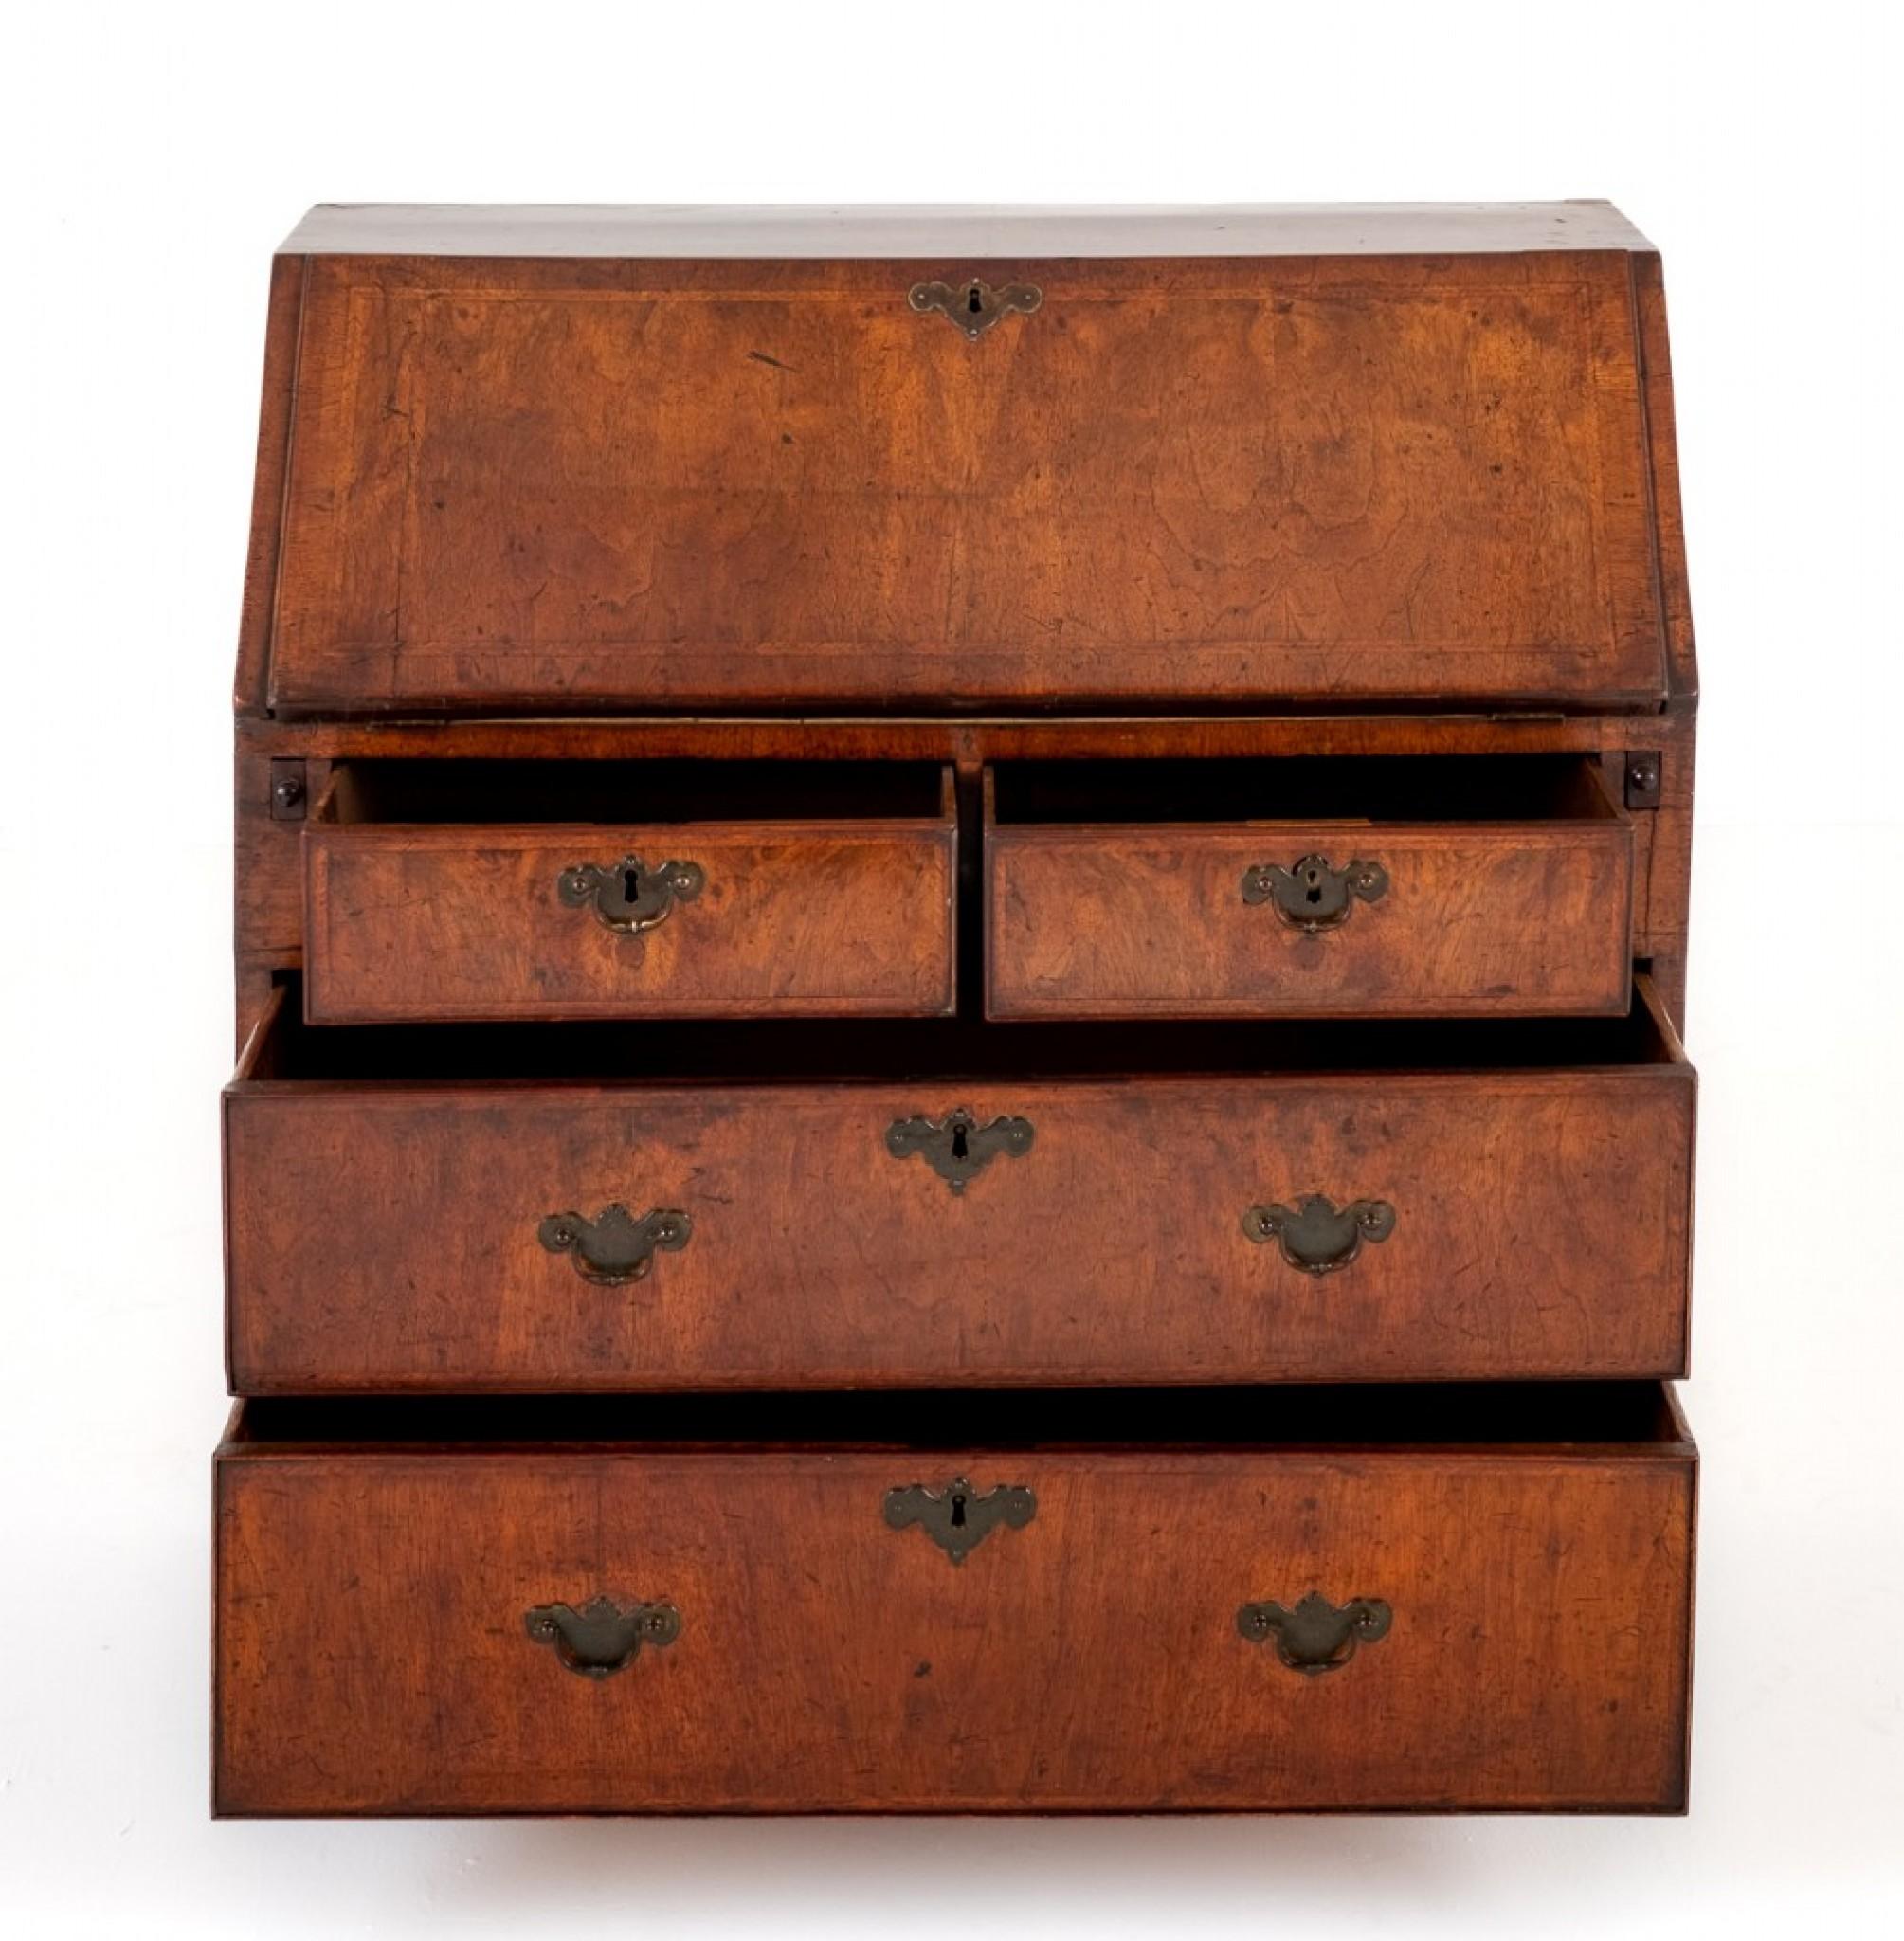 George I Walnut Bureau.
This Bureau Stands Upon Bracket Feet and Features an Arrangement of 2 Over 2 Oak Lined Drawers.
18th Century
The Drawers and the Fall Having Herringbone Inlays.
The Interior Having an Assortment of Drawers and